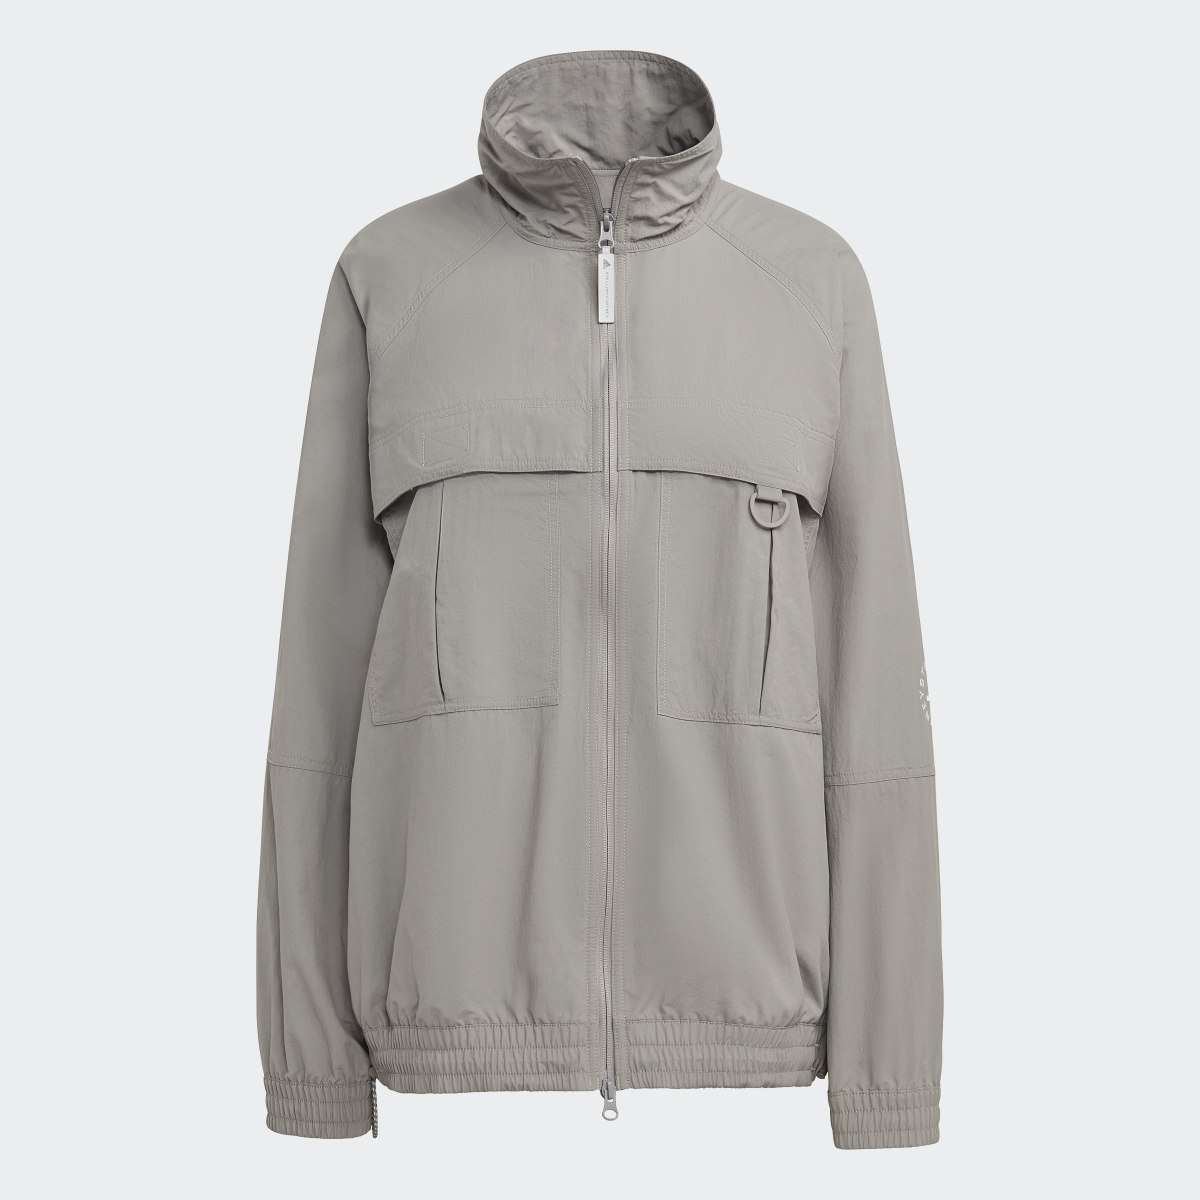 Adidas by Stella McCartney TrueCasuals Woven Solid Track Top. 5